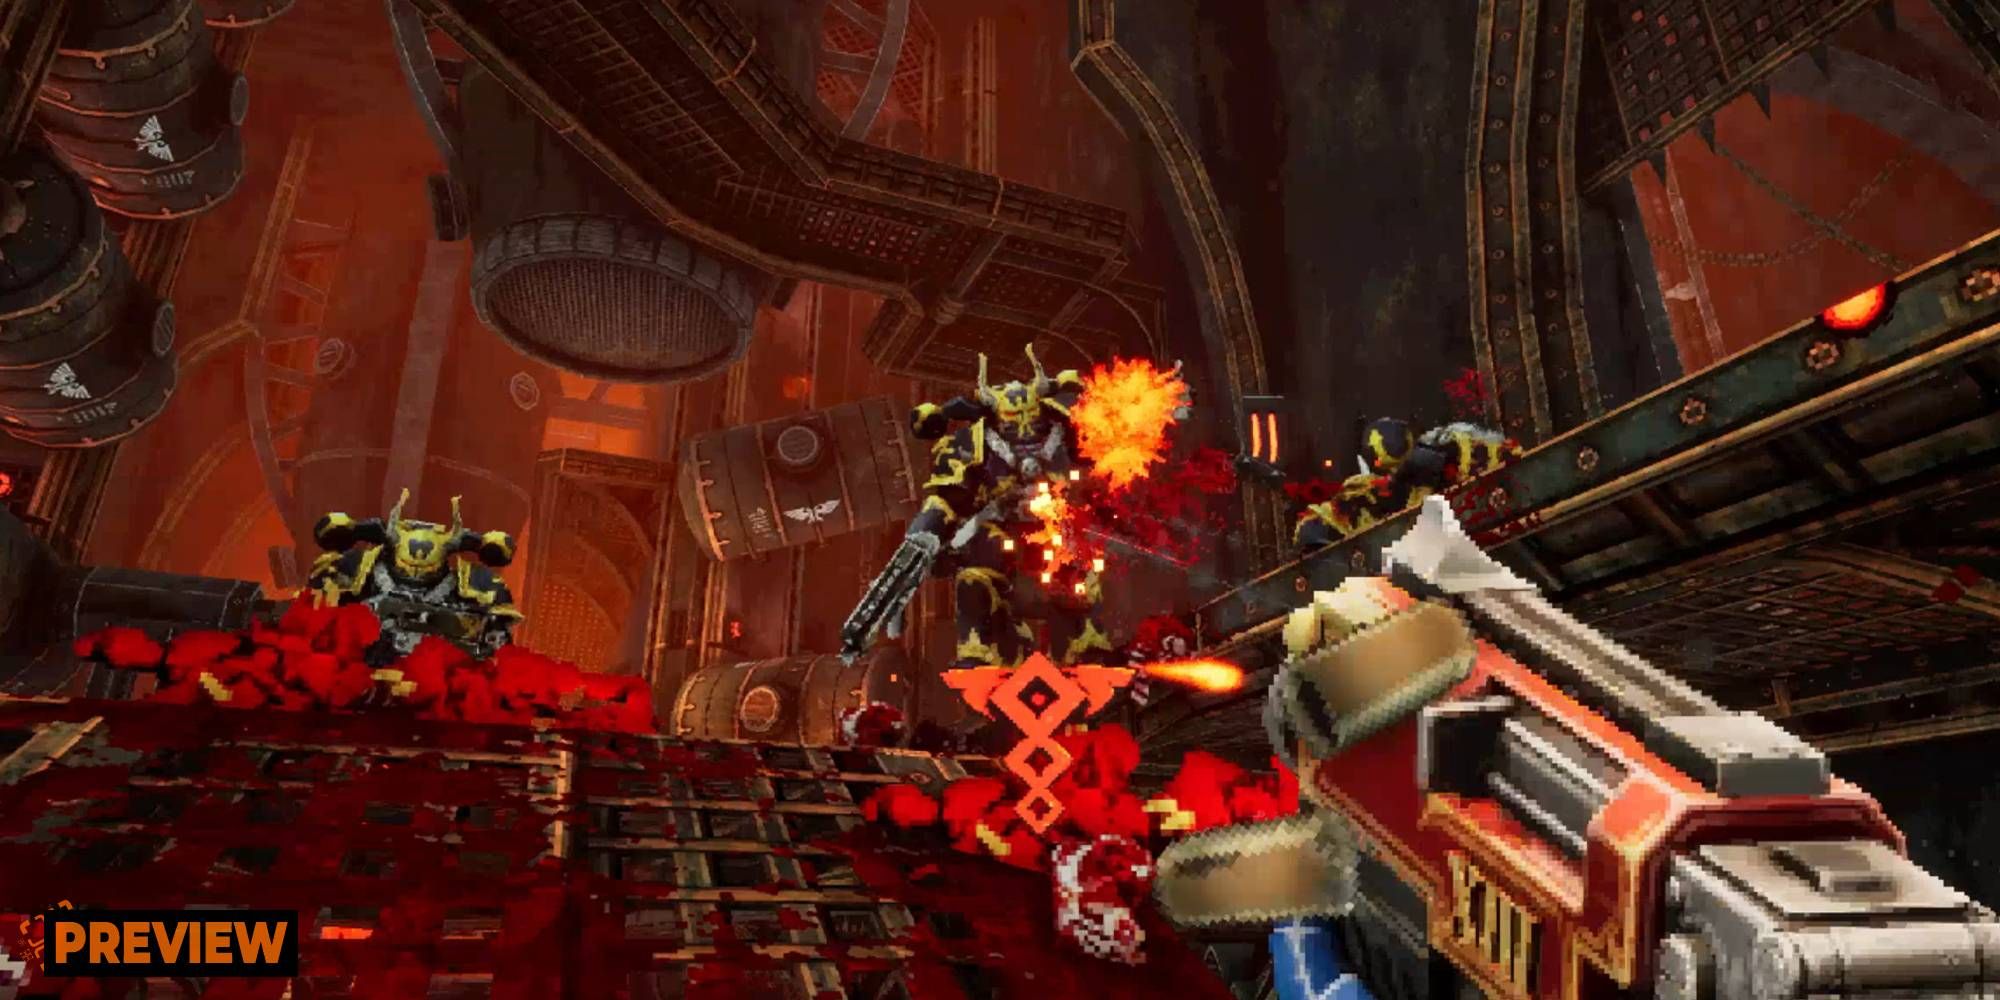 Warhammer 40K Boltgun Preview Image with a gun and enemies